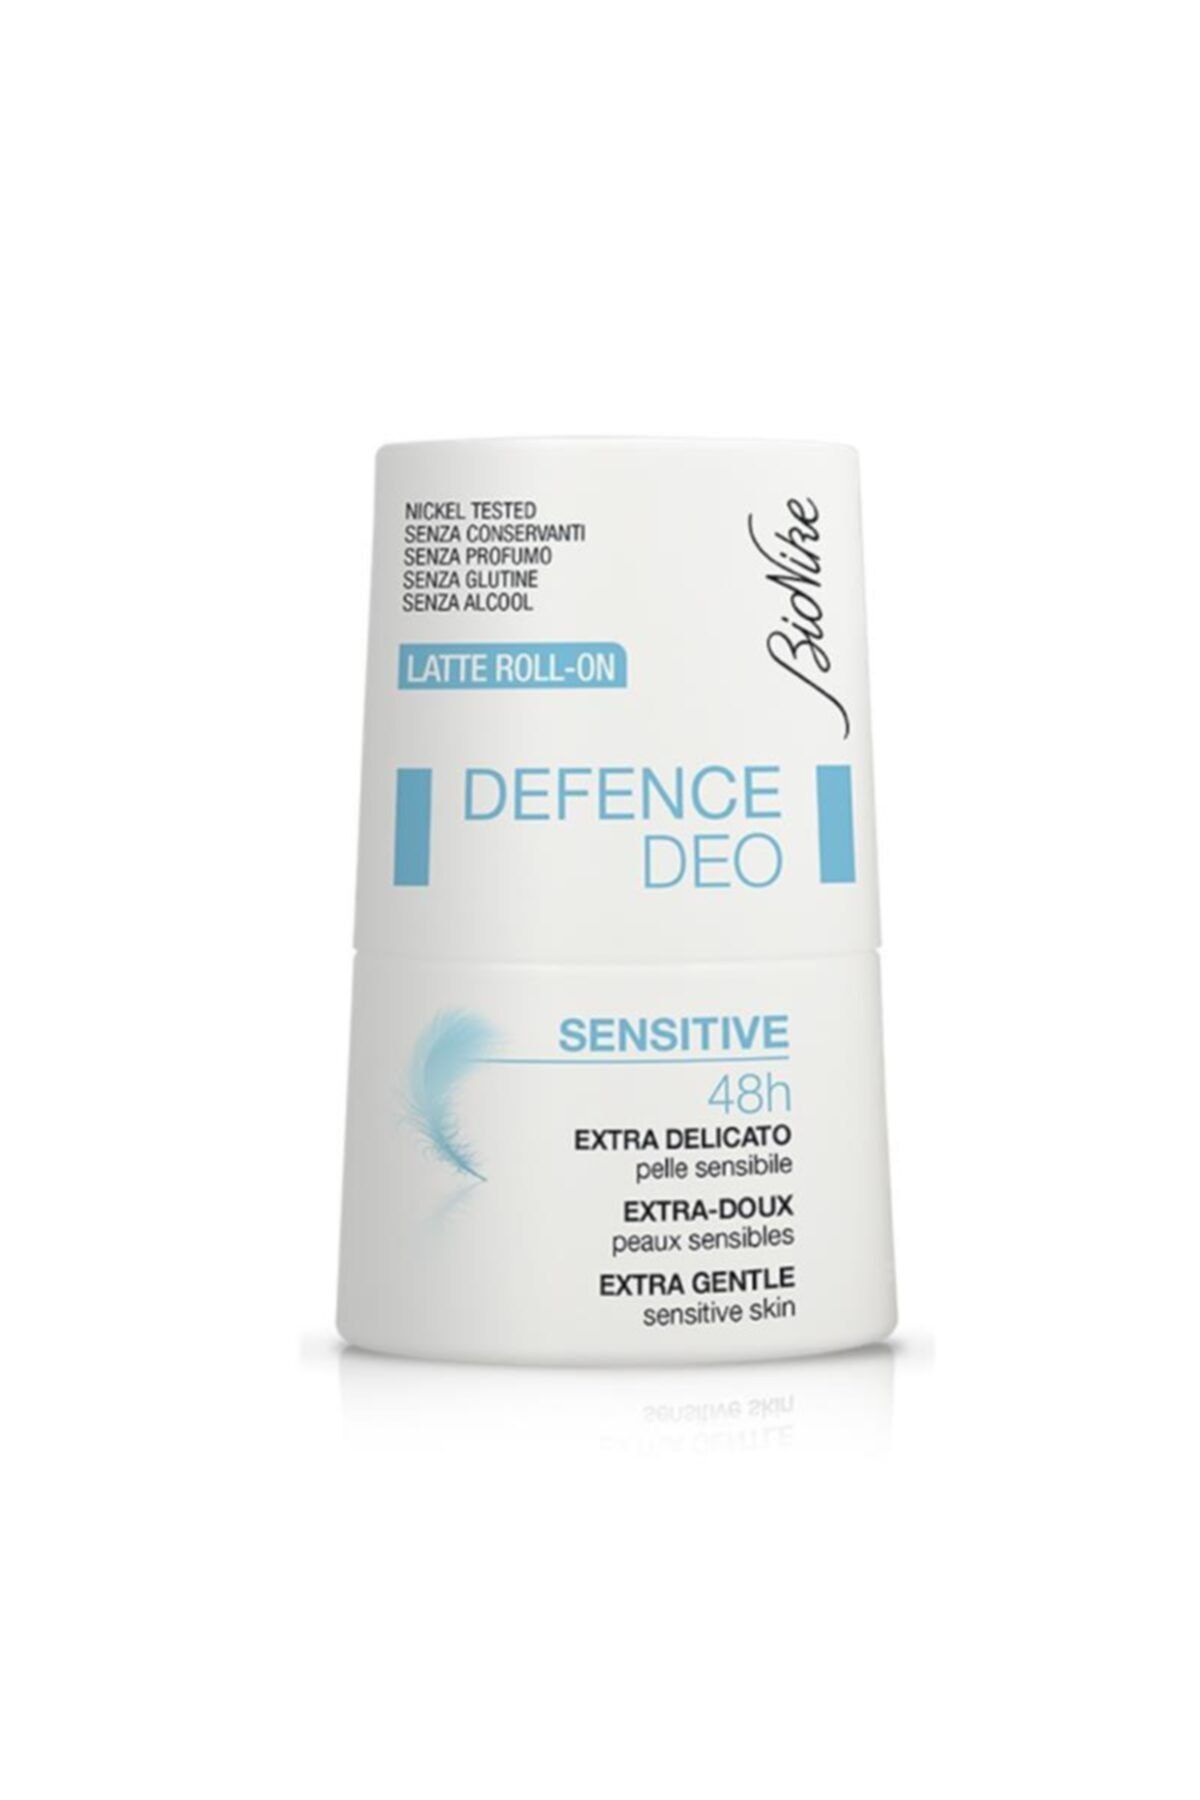 BioNike Defence Deo Sensitive 48h Latte Roll-on 50 Ml